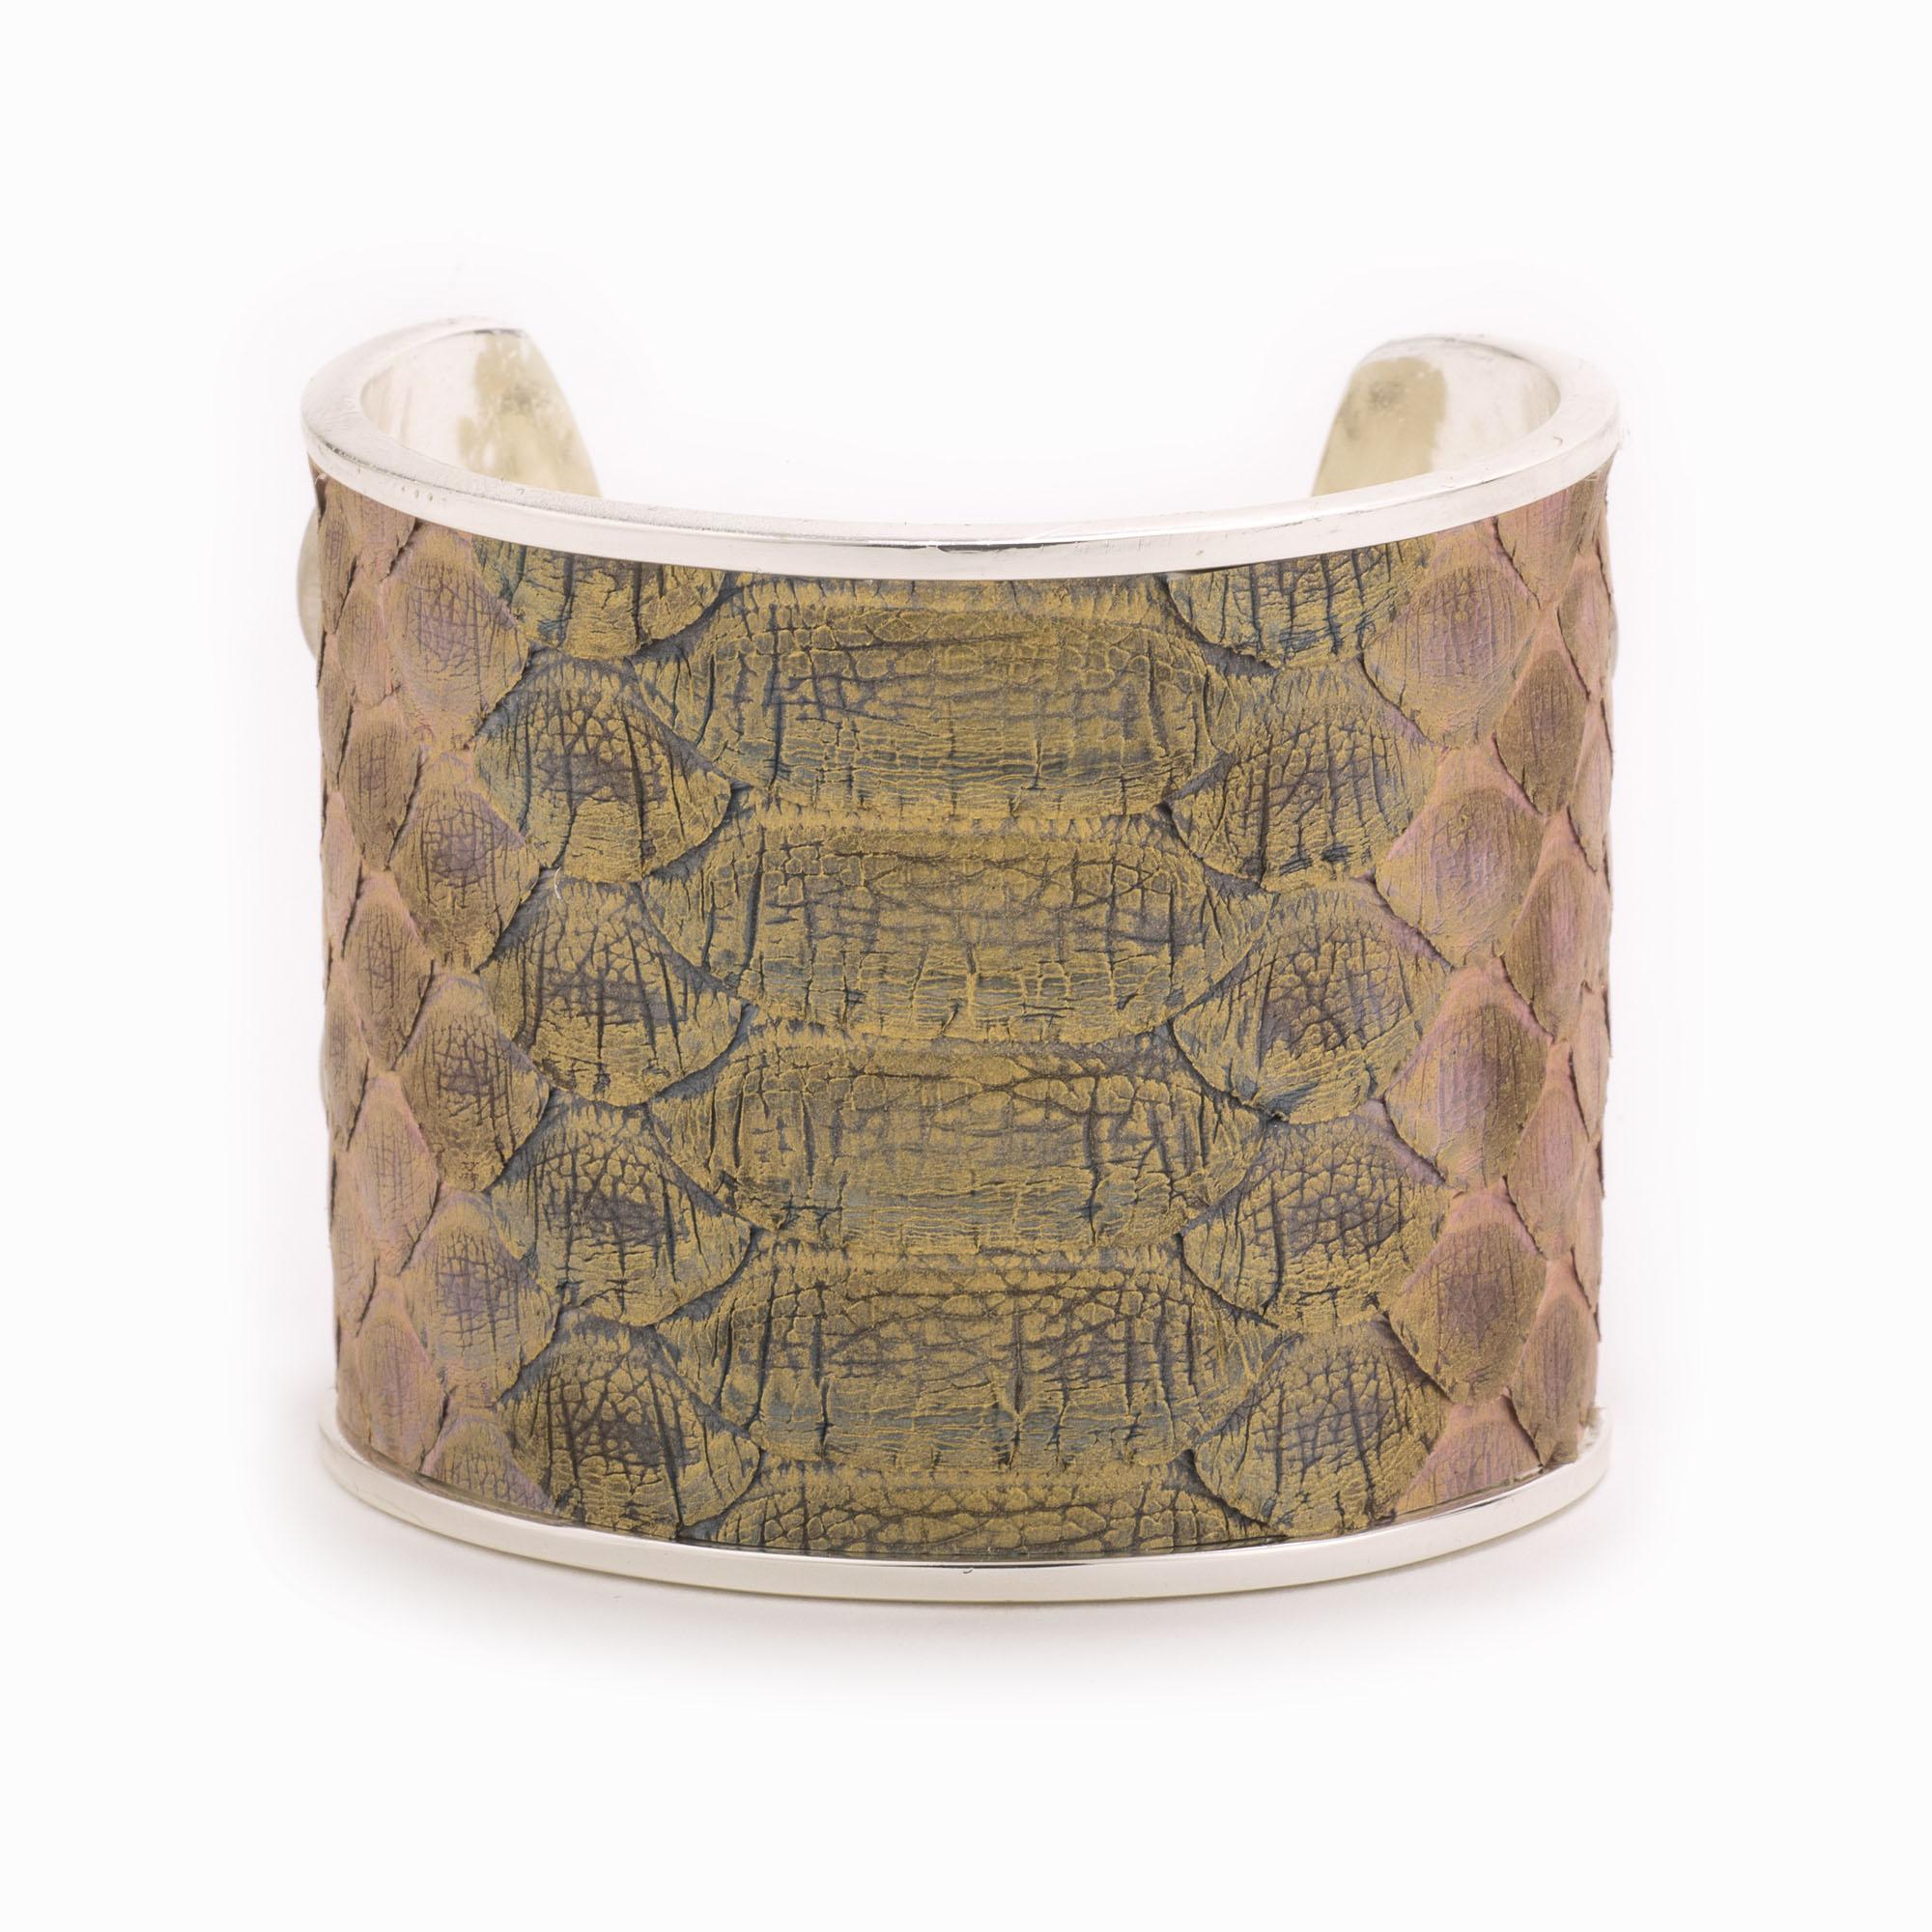 Featured image for “Large Blush Metallic Silver Cuff”